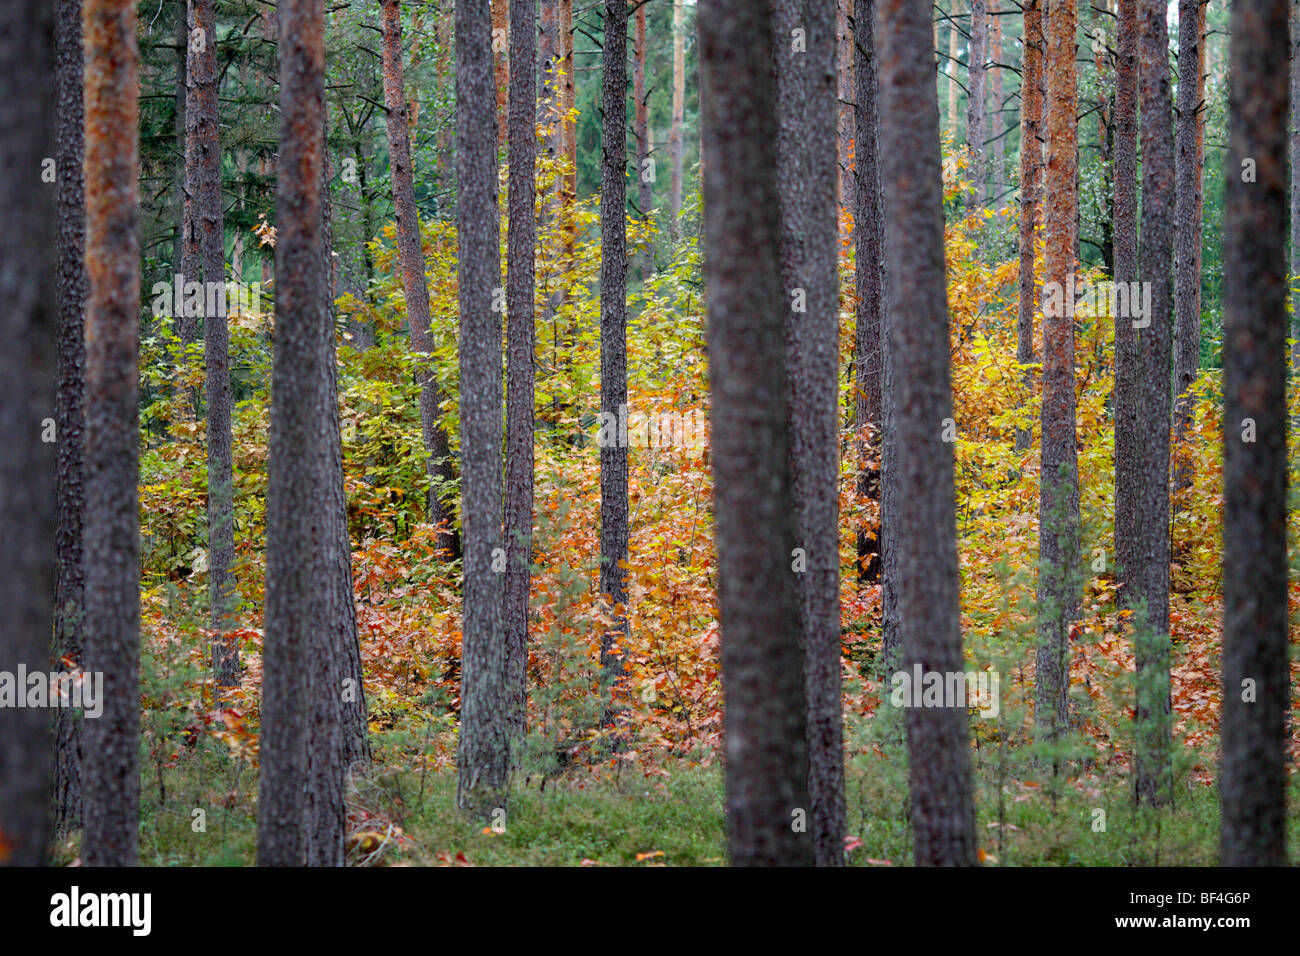 Fall colours in a pine forest Stock Photo